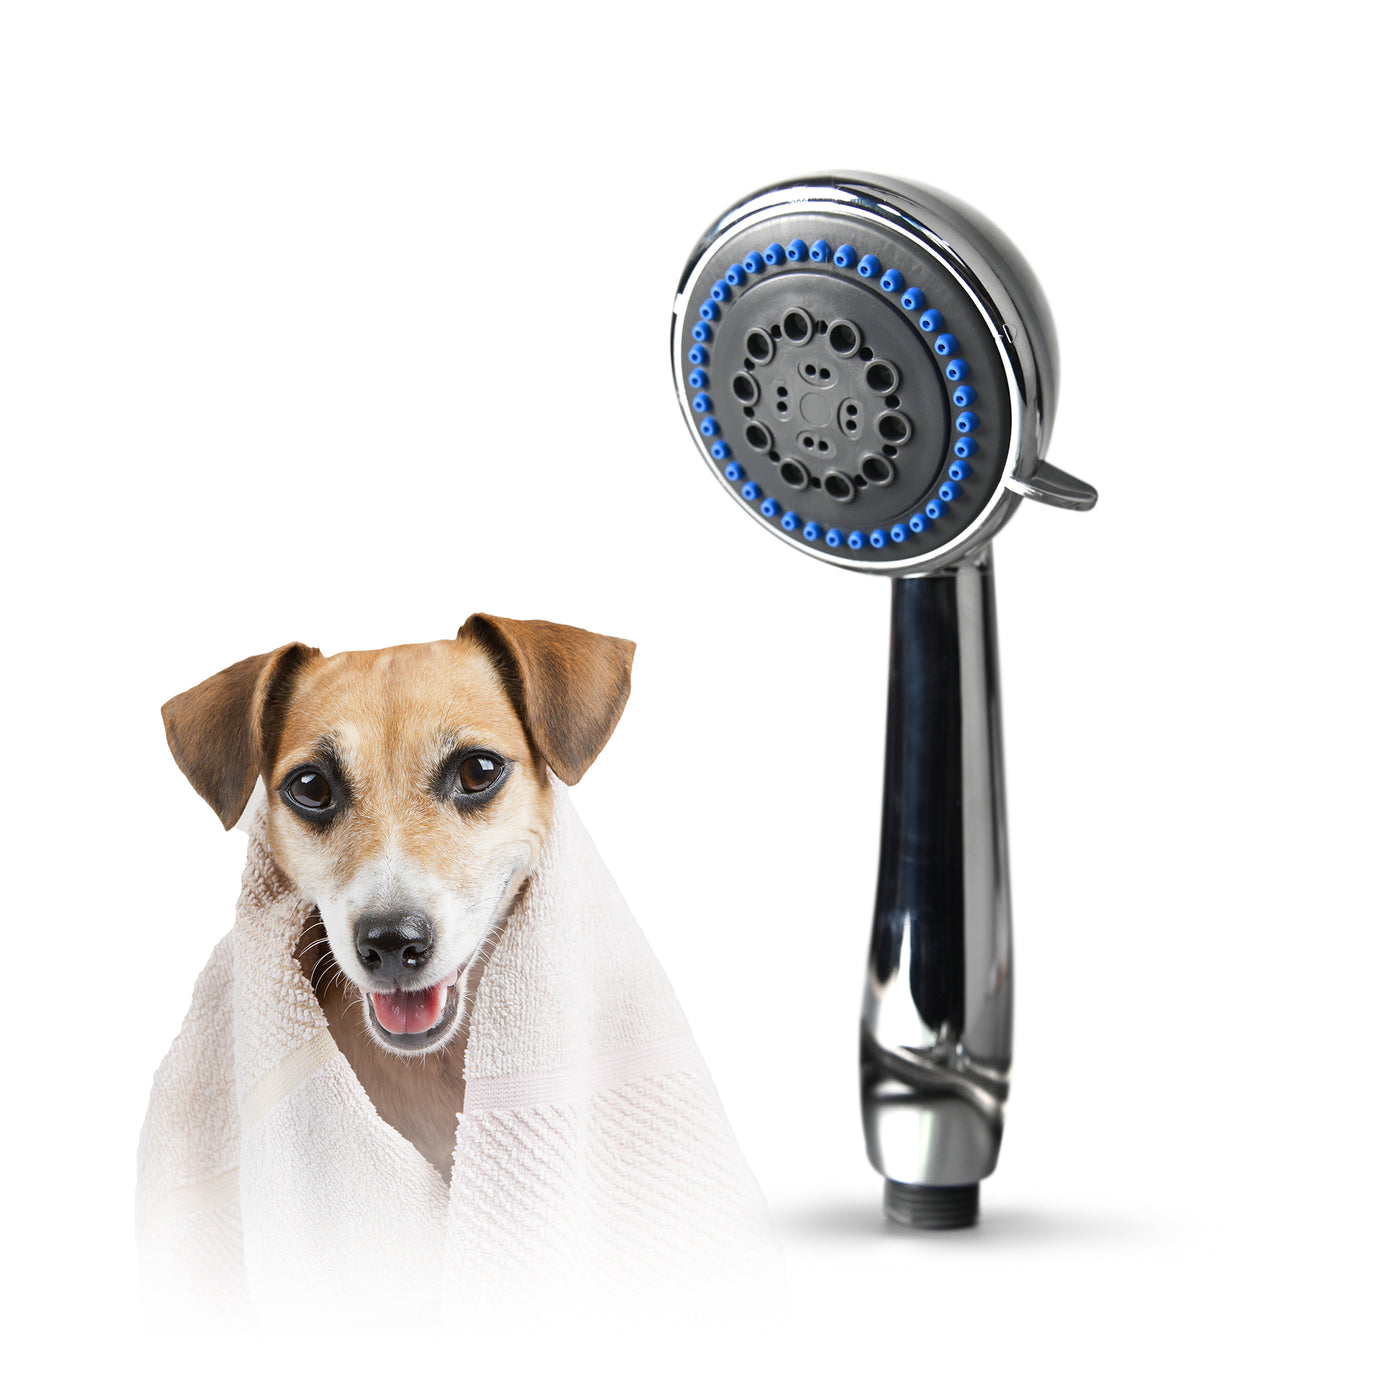 The Best Sprayer for Your Home Dog Wash is Meant for RV Living!